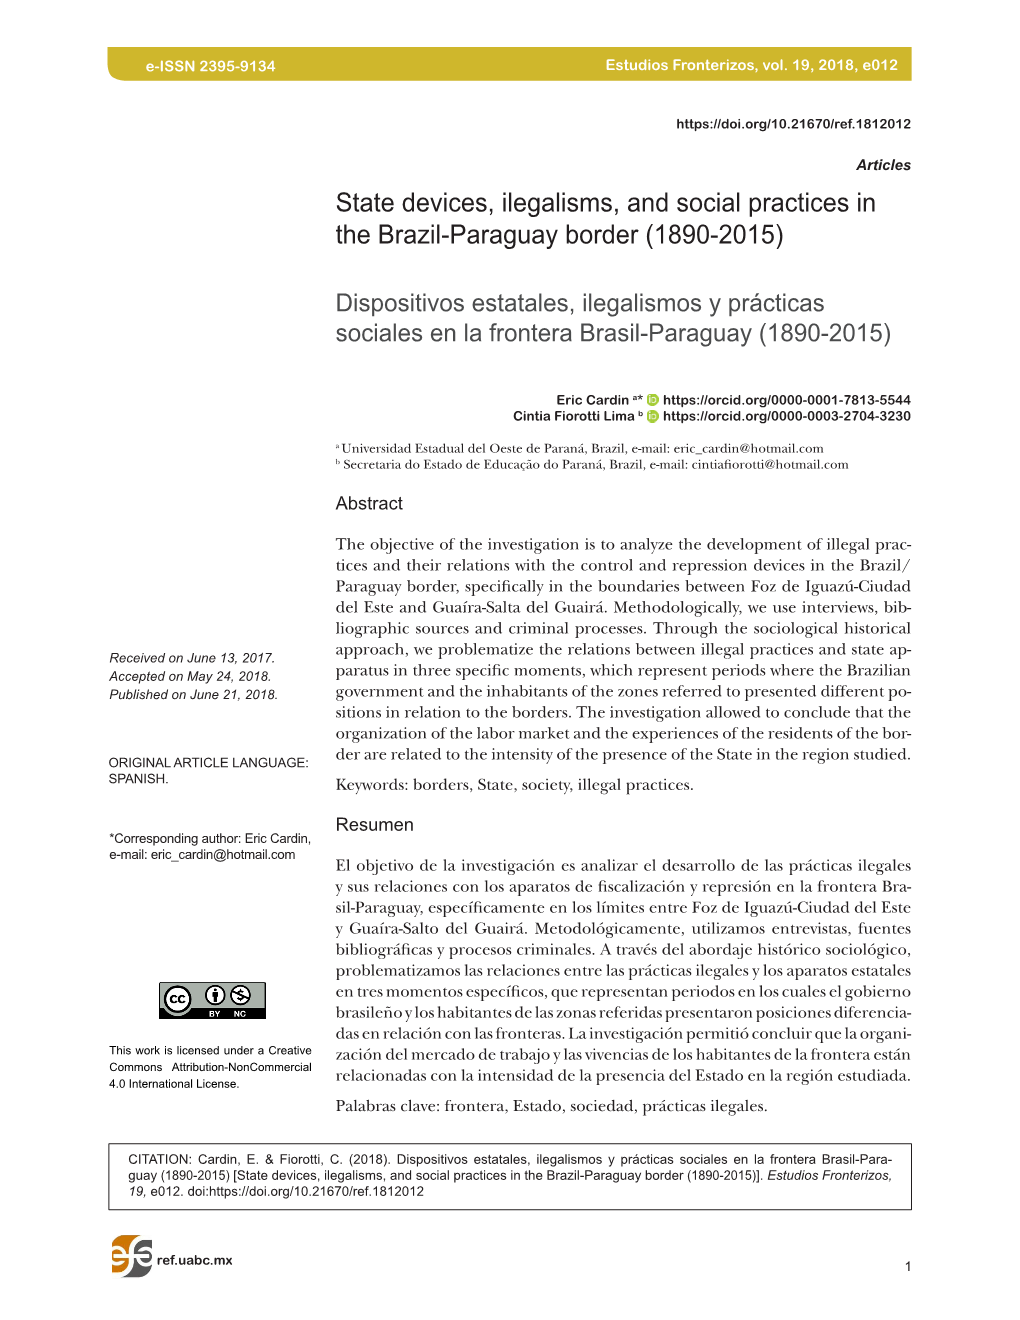 State Devices, Ilegalisms, and Social Practices in the Brazil-Paraguay Border (1890-2015)